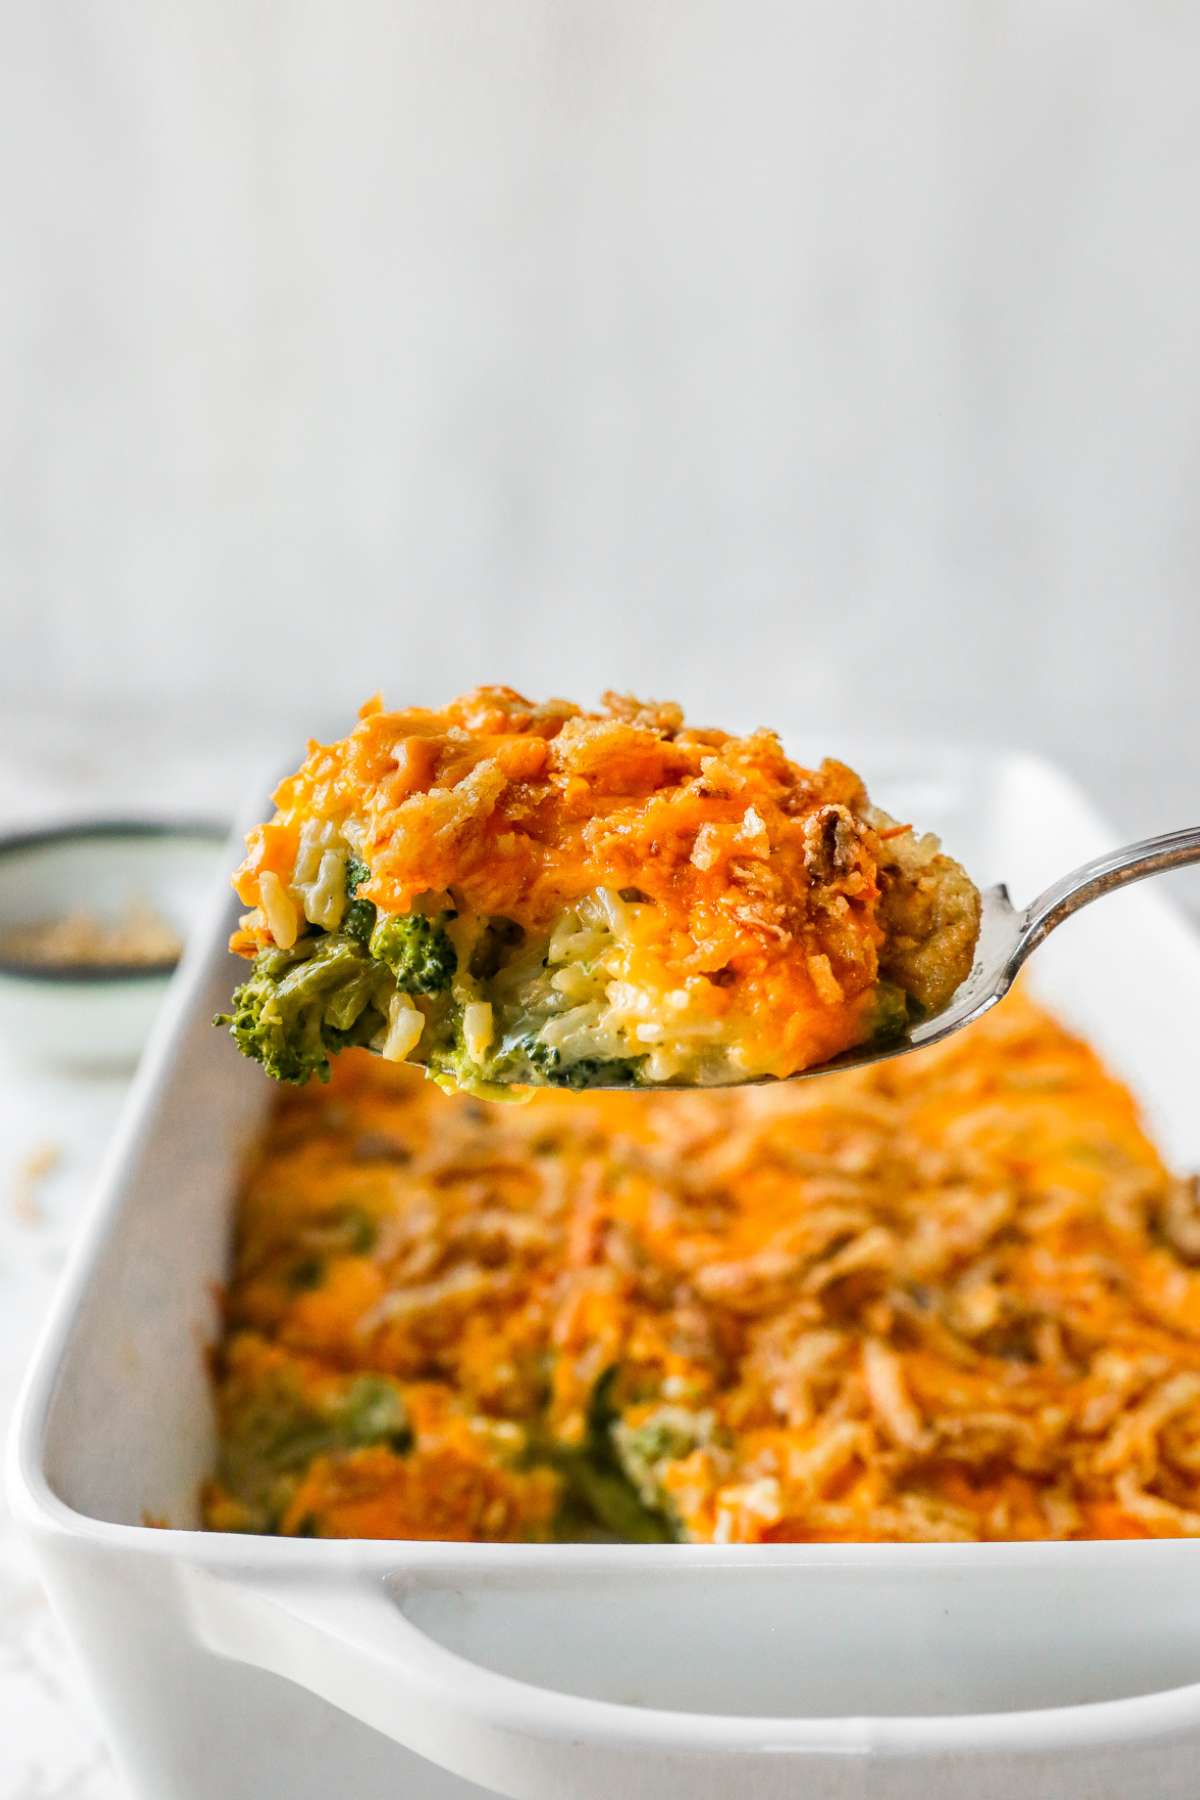 Serving broccoli rice casserole out of a baking dish.